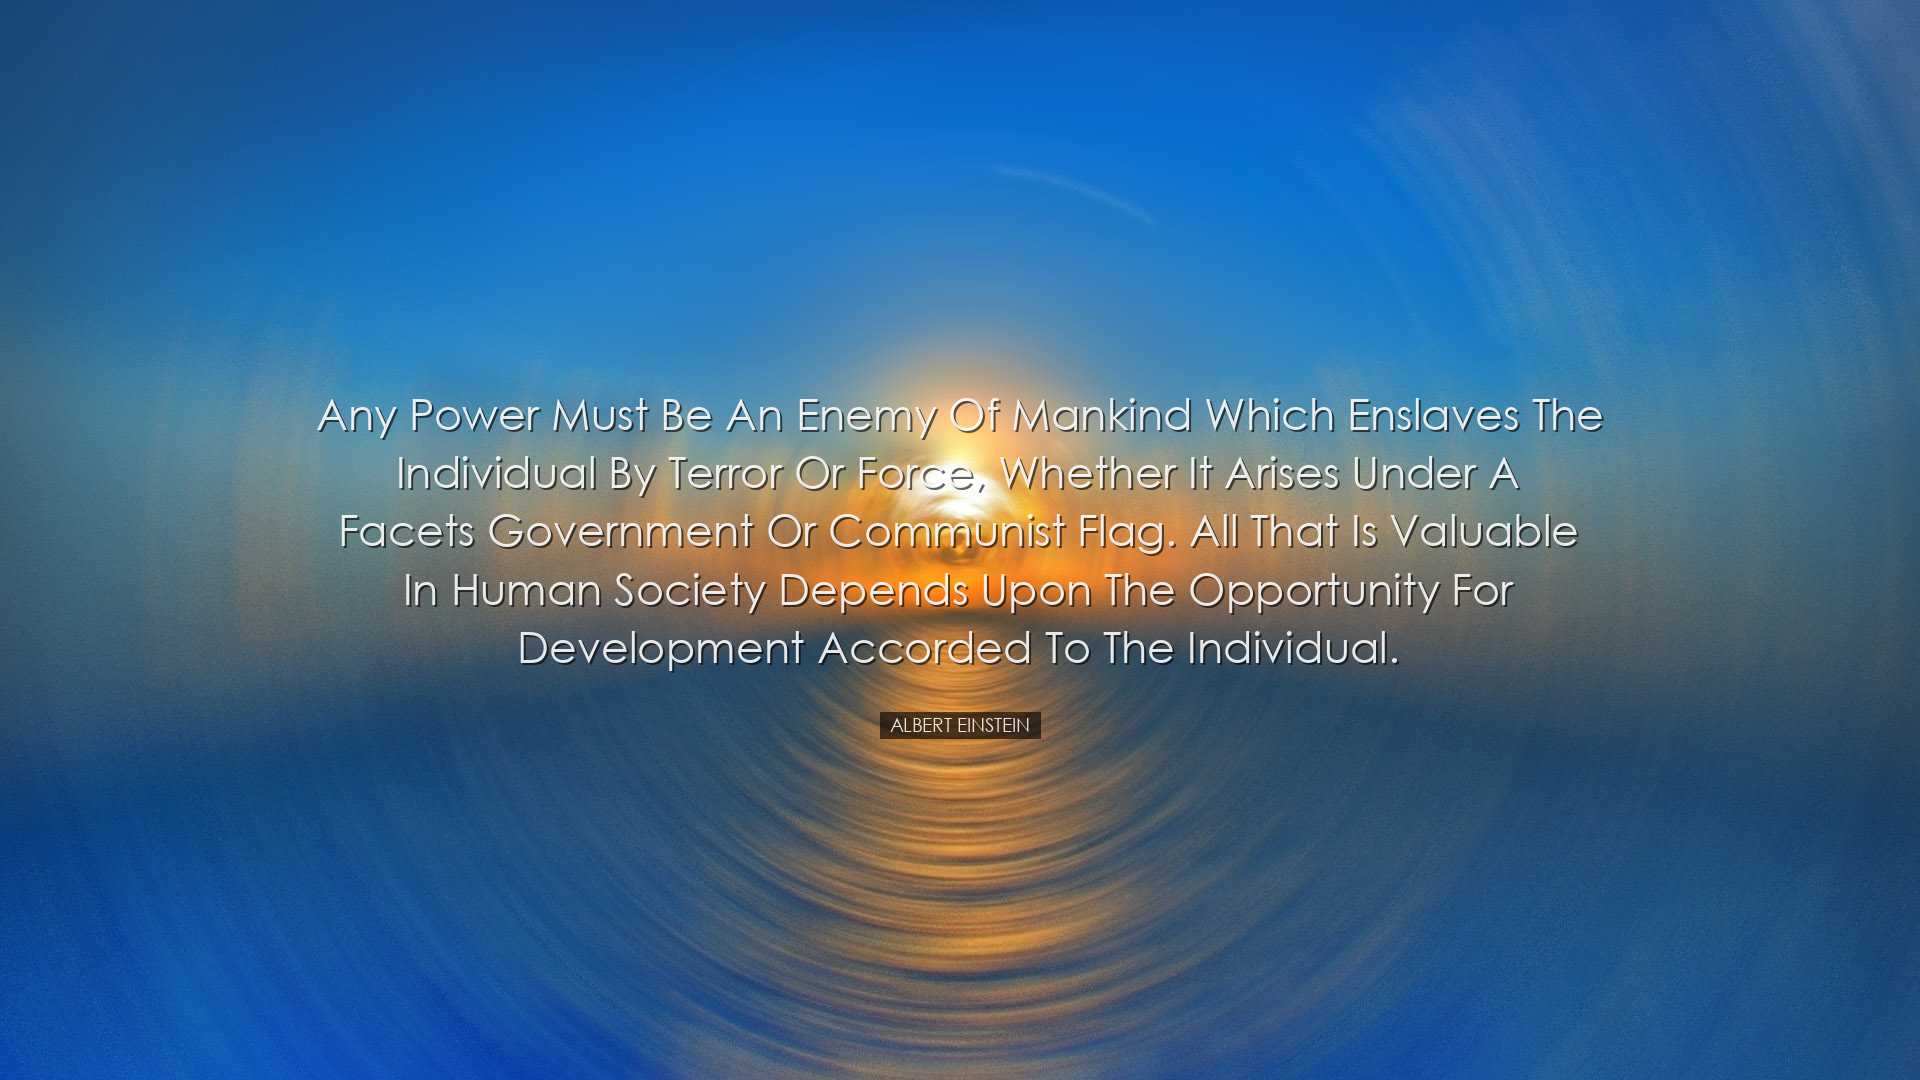 Any power must be an enemy of mankind which enslaves the individua